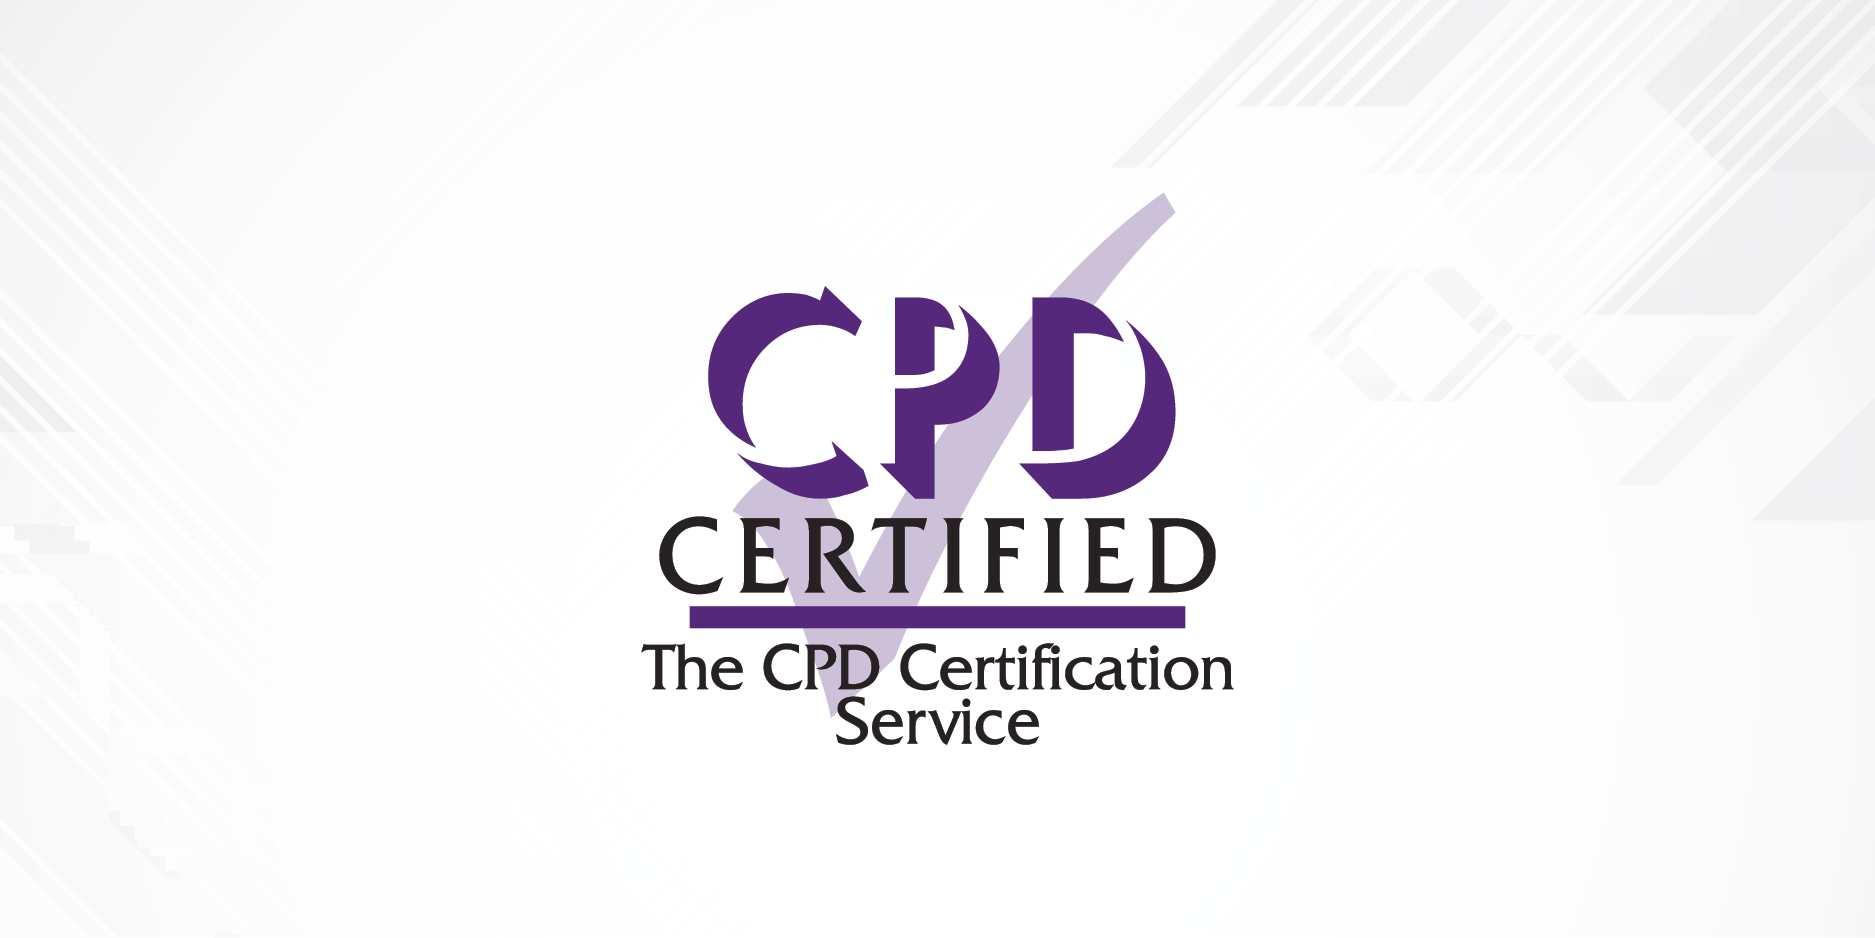 The UAE Academy has been approved as a CPD UK Certified Member